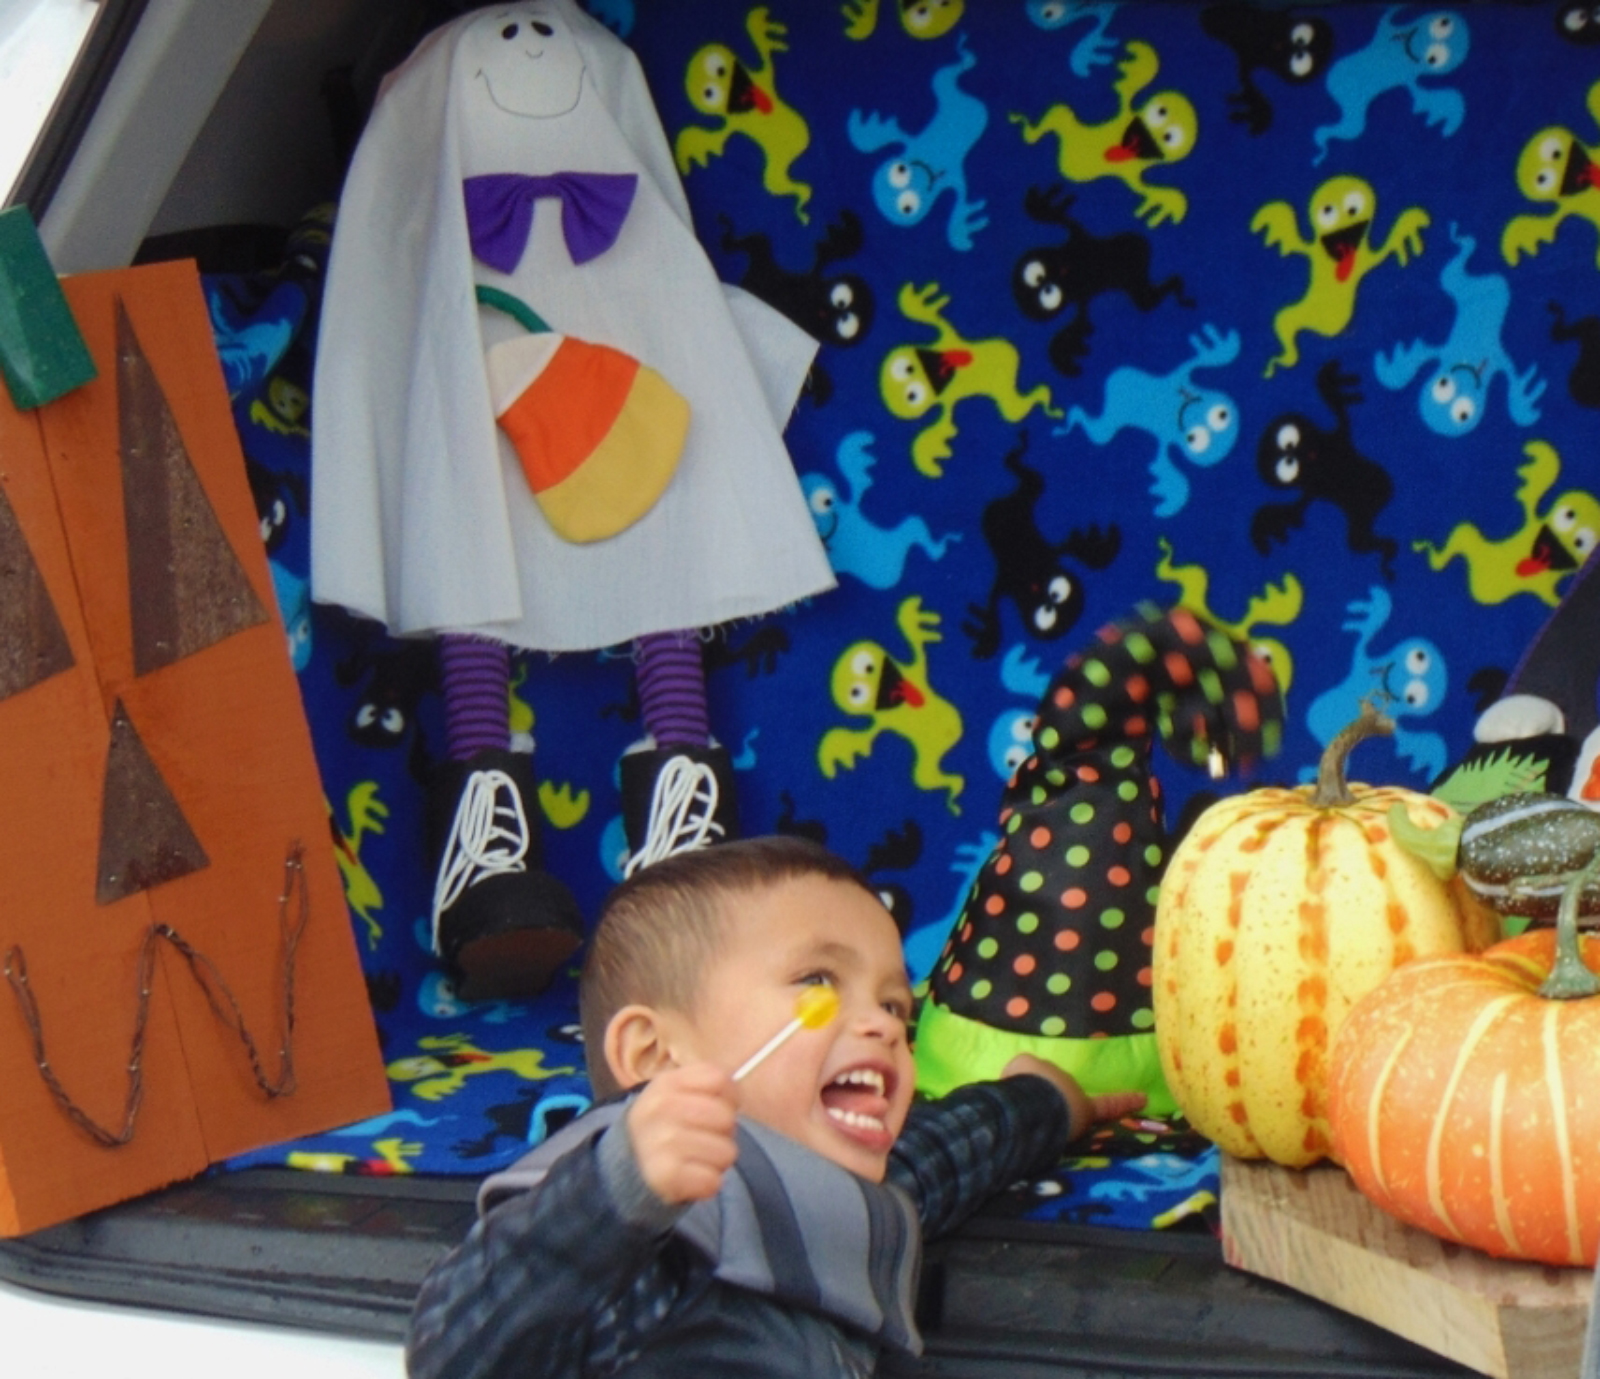 Lake County Halloween events scheduled throughout county